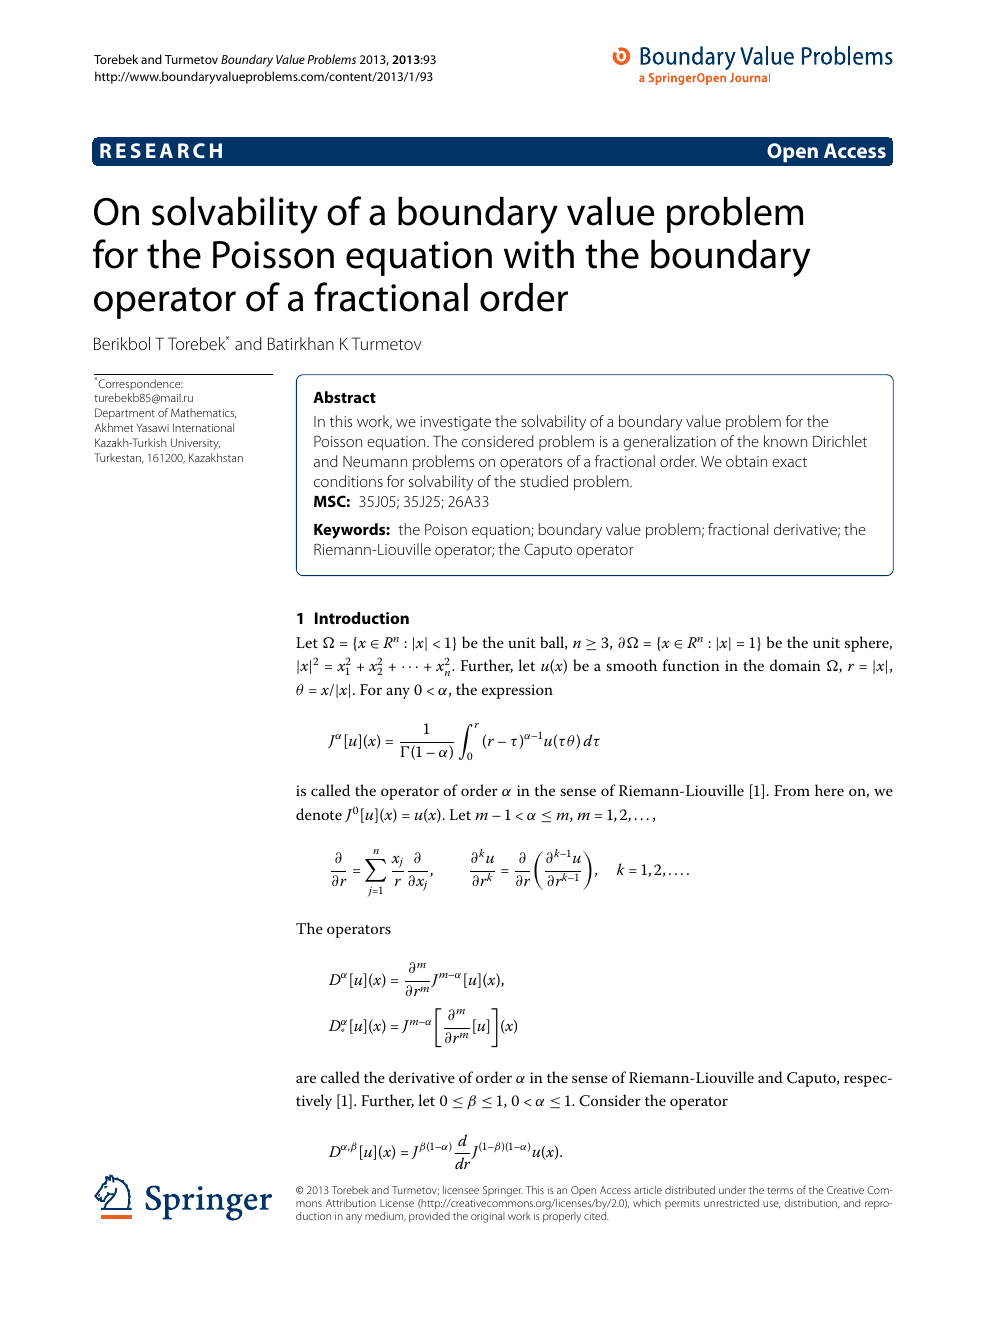 On Solvability Of A Boundary Value Problem For The Poisson Equation With The Boundary Operator Of A Fractional Order Topic Of Research Paper In Mathematics Download Scholarly Article Pdf And Read